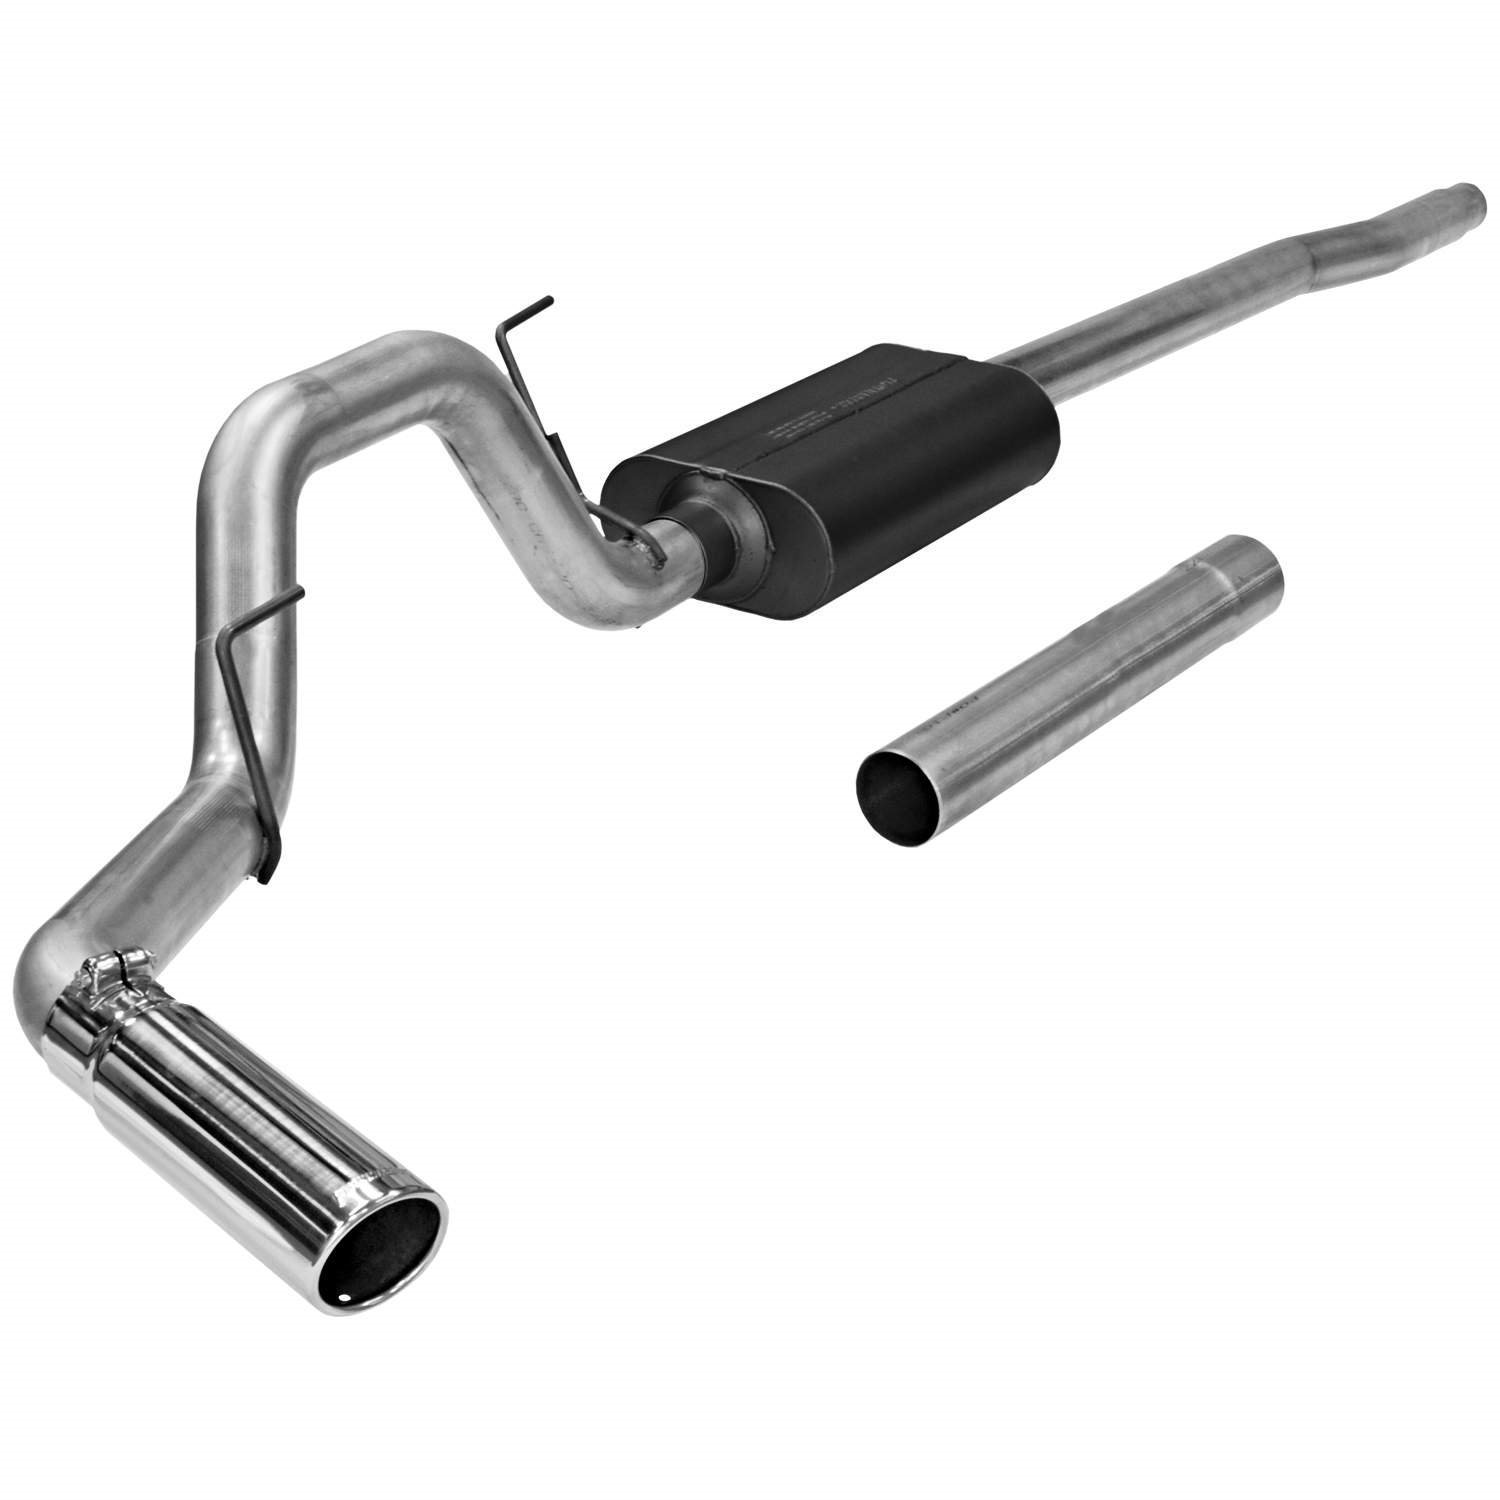 Force II Cat-Back Exhaust System 2004-2008 Ford F-150 4.6/5.4L